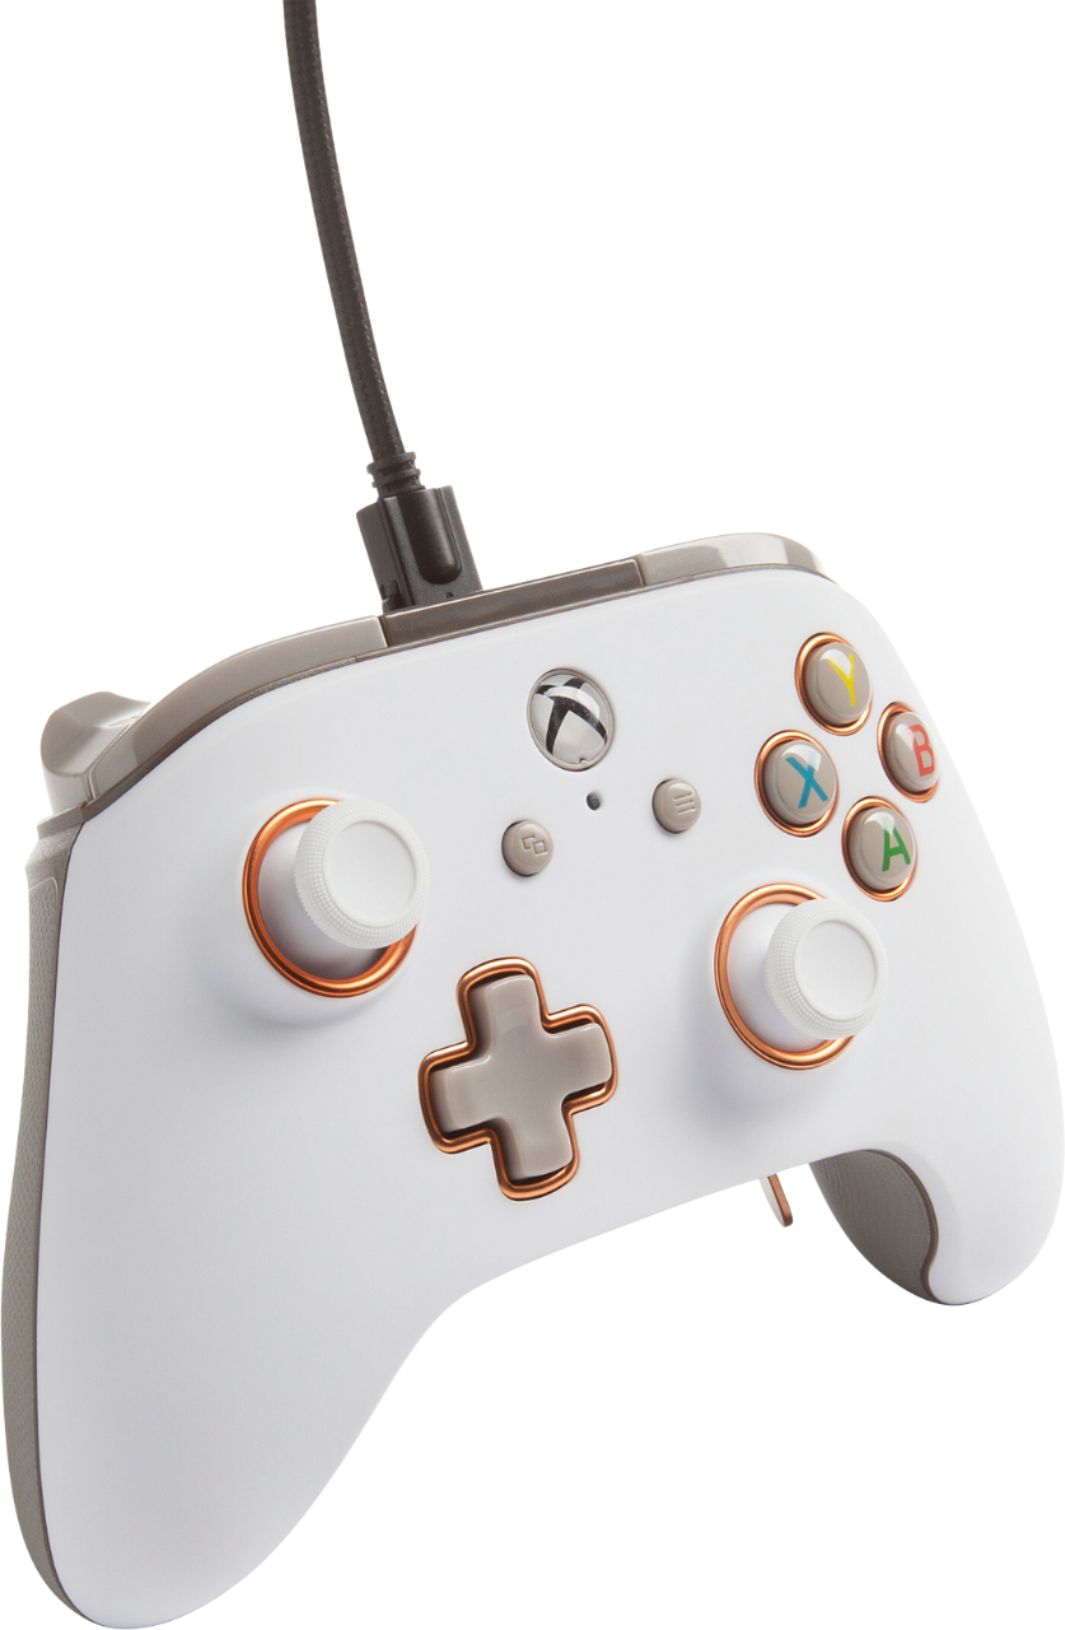 powera fusion controller for xbox one stores